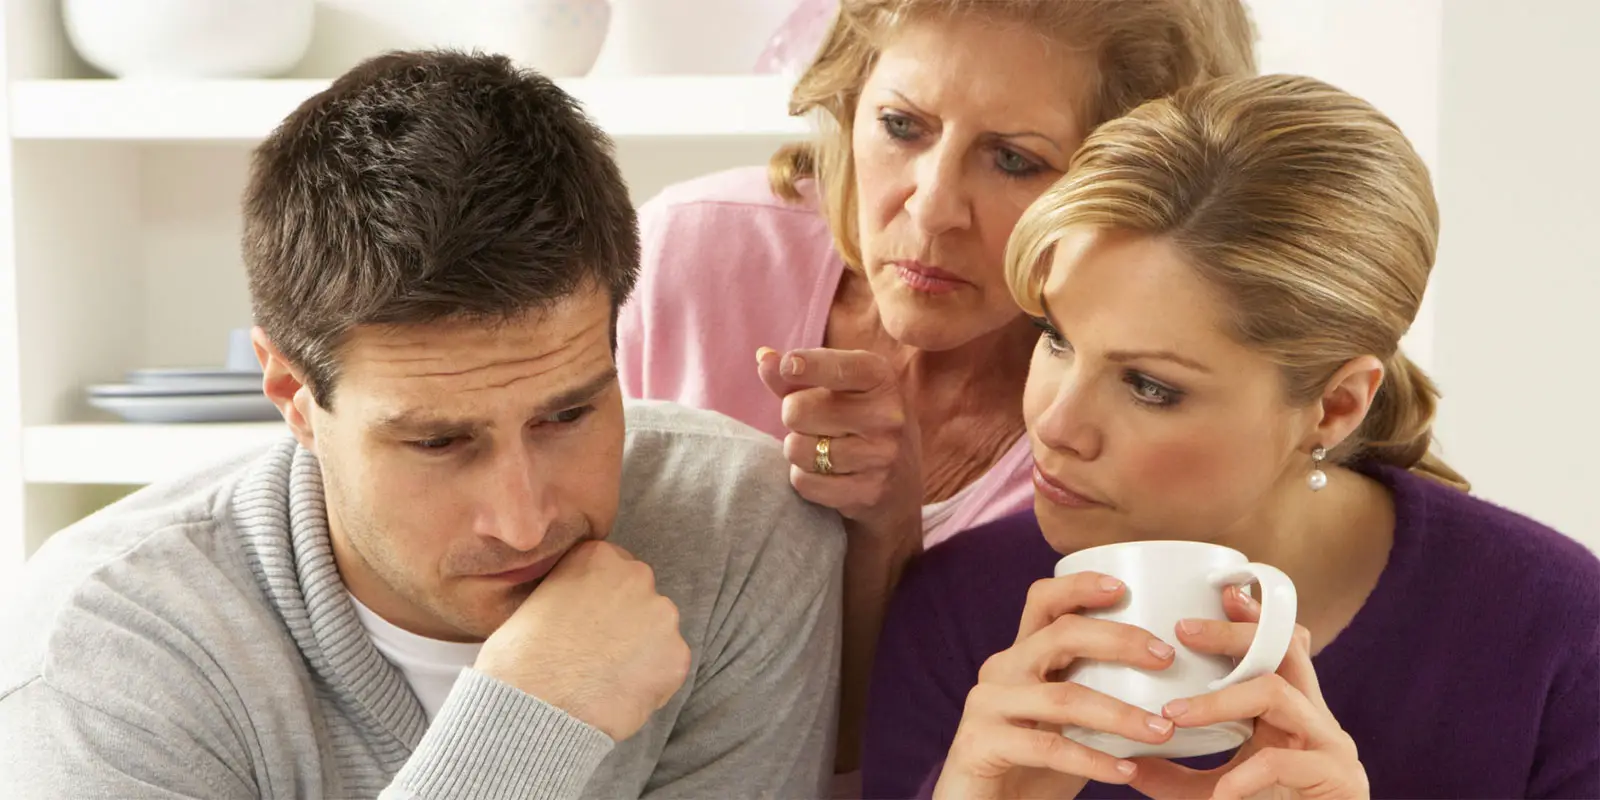 11 Confessions of Married Men Attracted to their Mother-in-Law